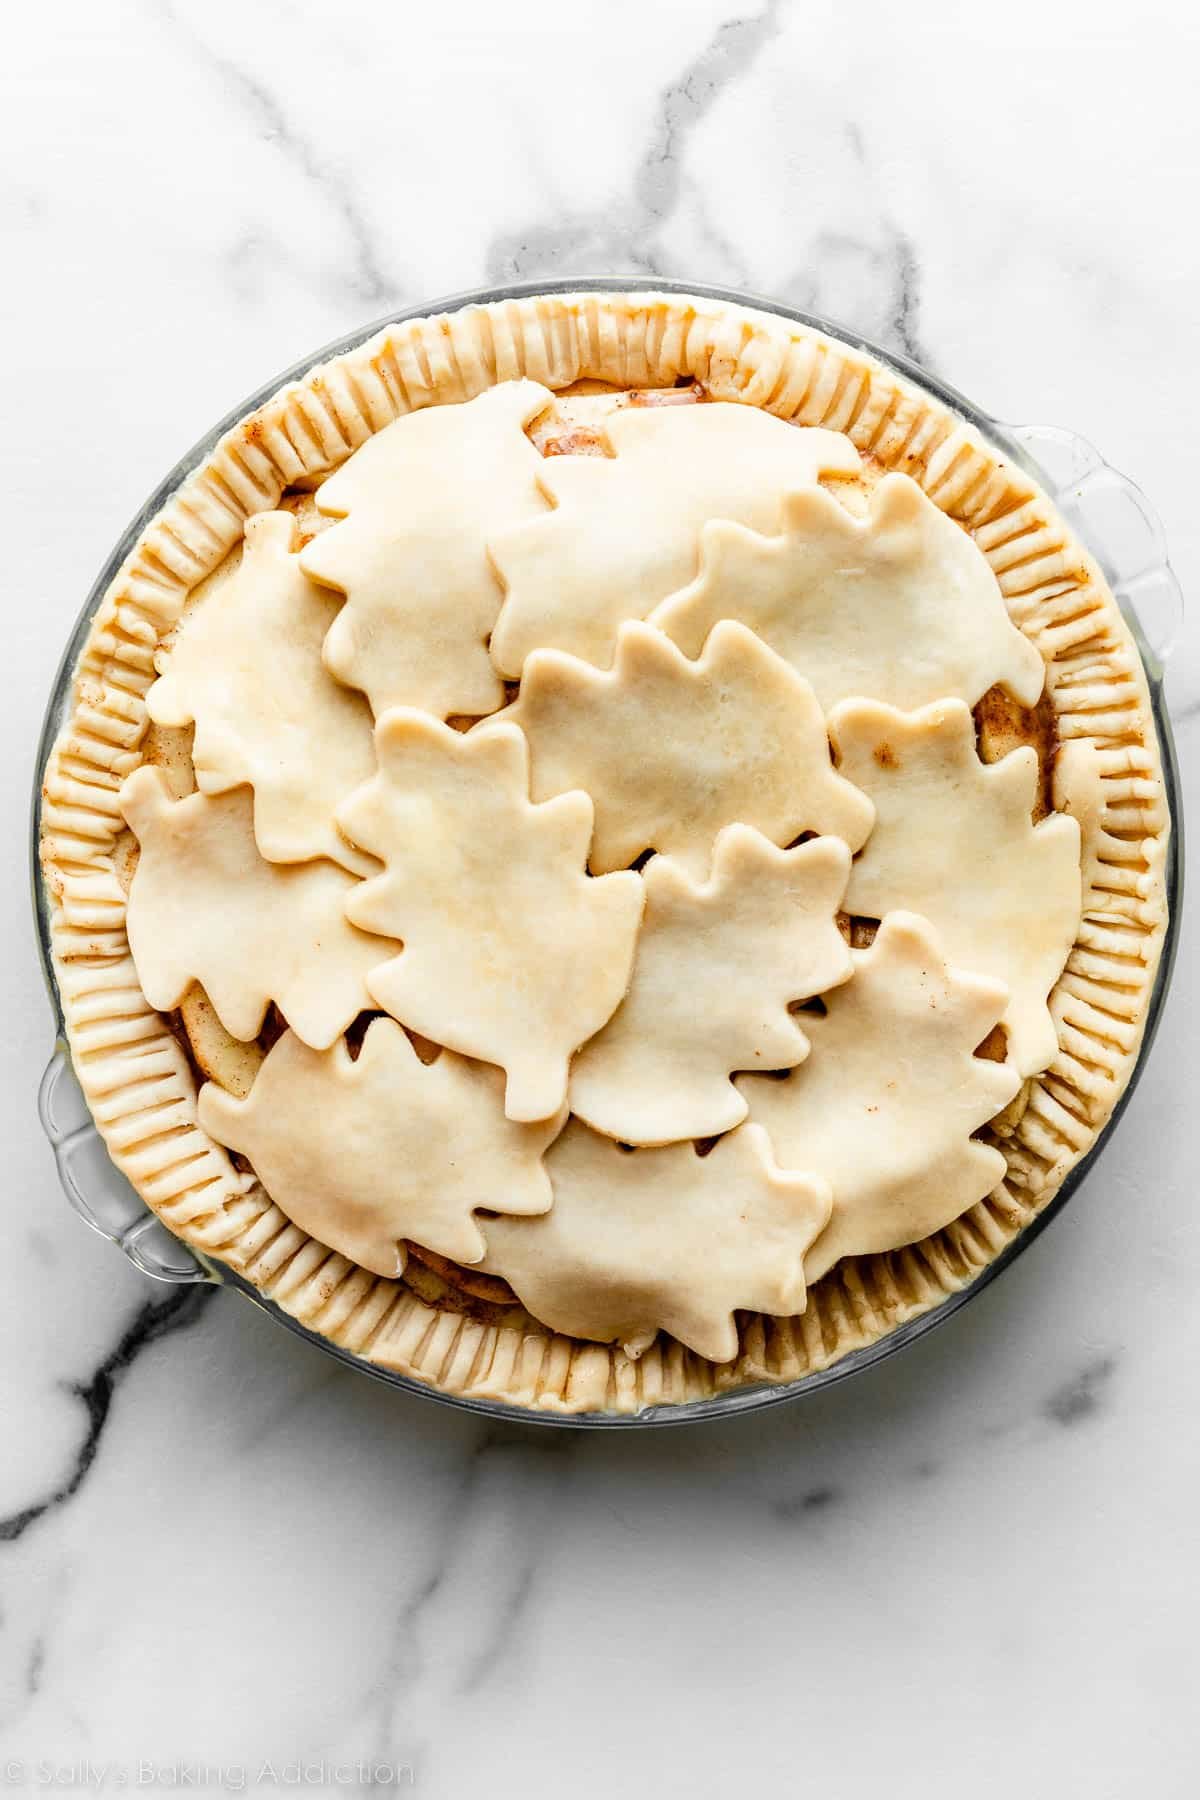 unbaked pie with 12 big leaf pie dough shapes arranged on top.